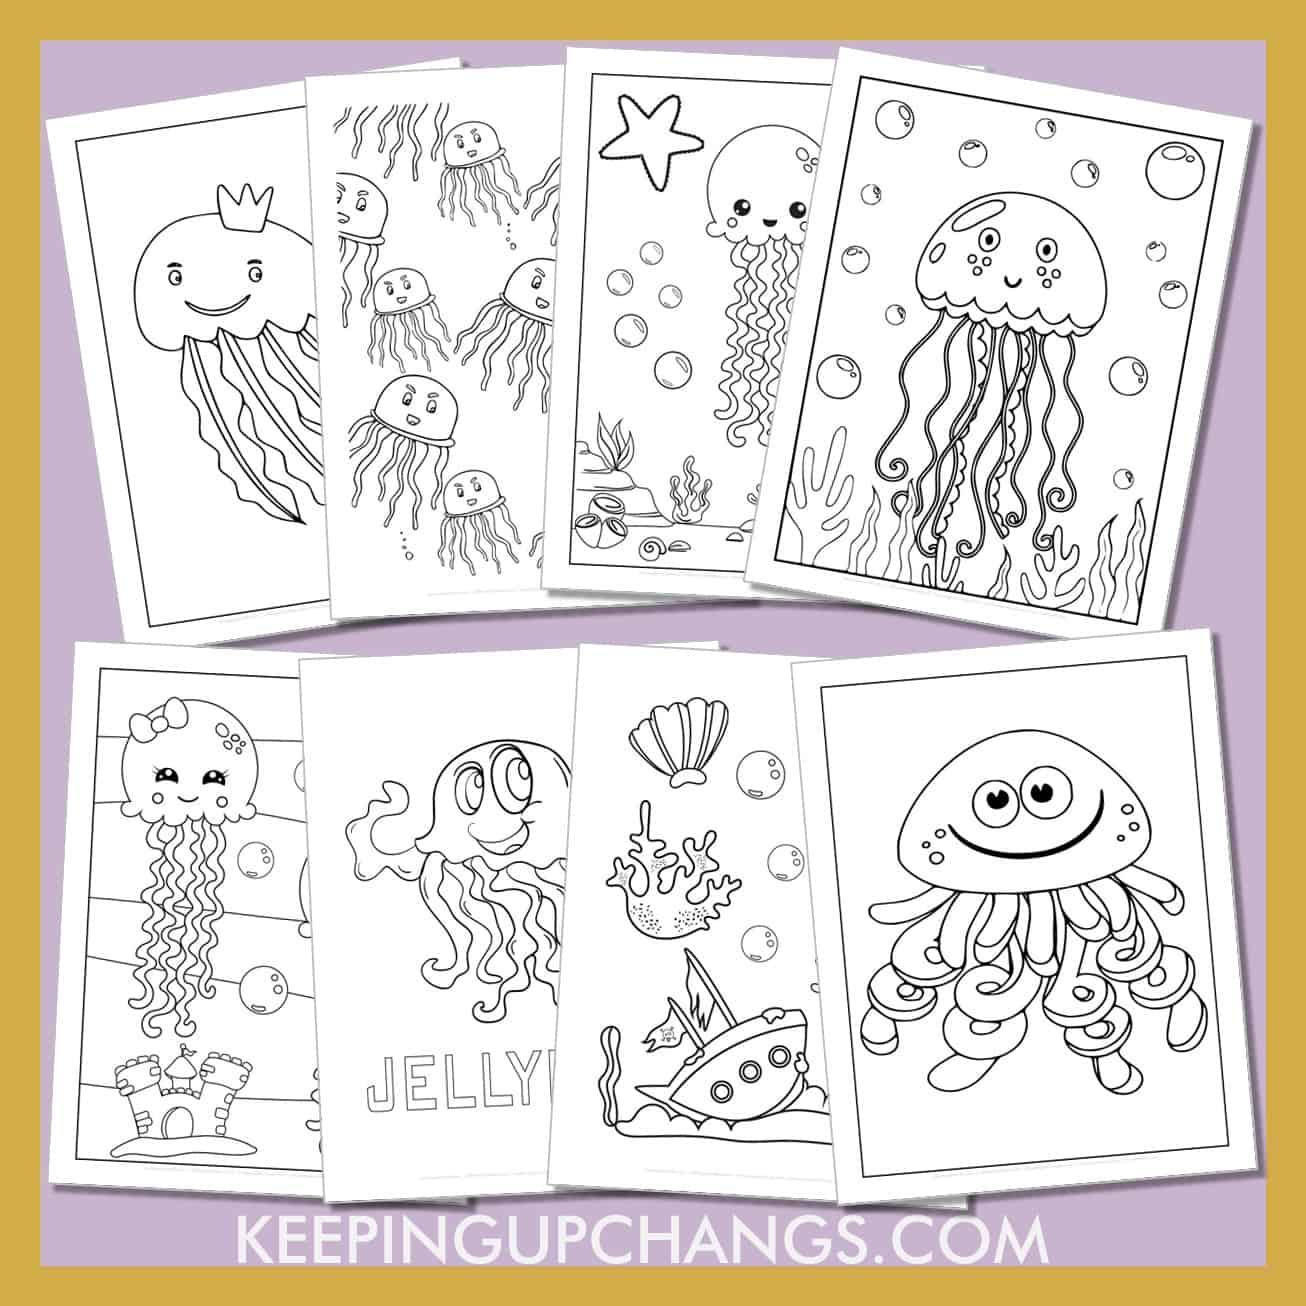 free jellyfish to color for toddlers, kids, adults.